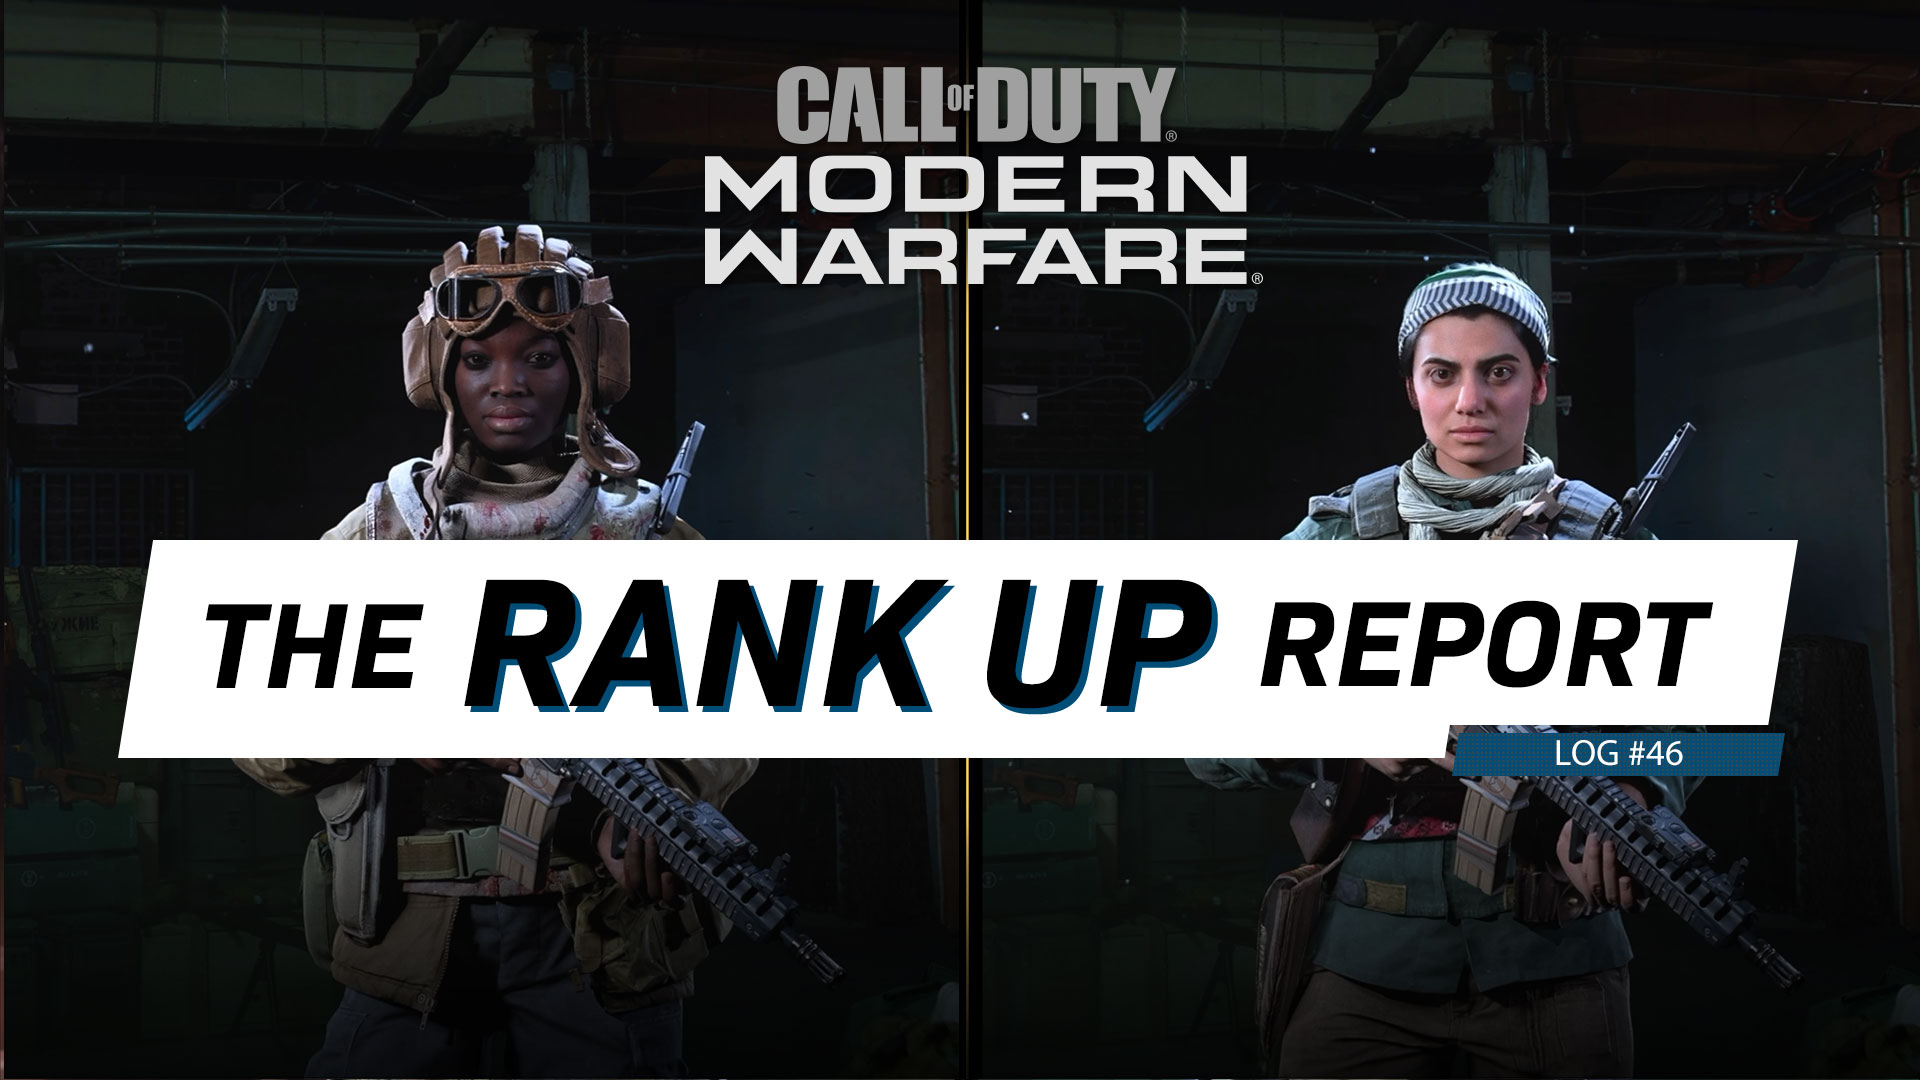 Top games tagged call-of-duty 